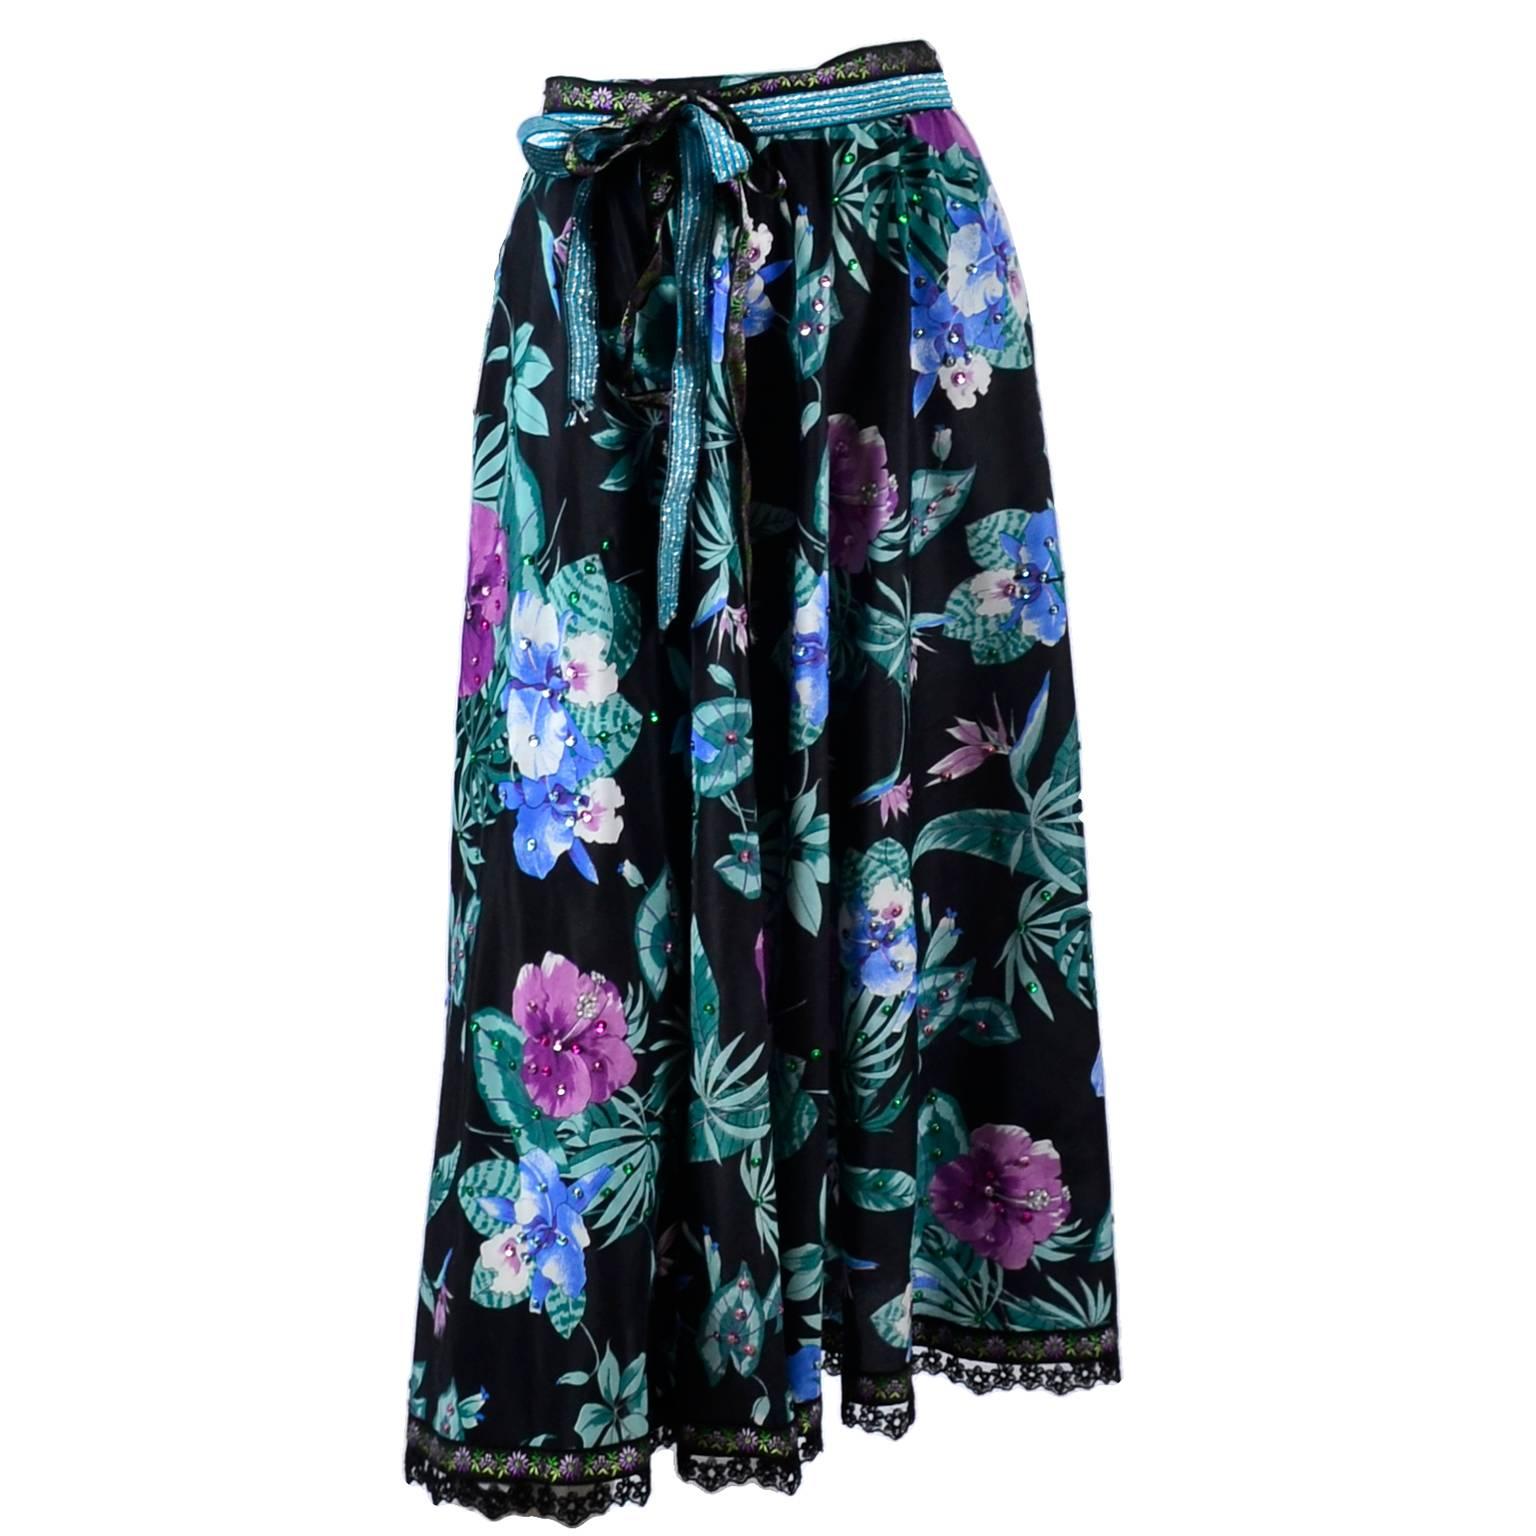 Giorgio di Sant' Angelo Skirt in Black Cotton Floral Print With Sequins, 1980s 